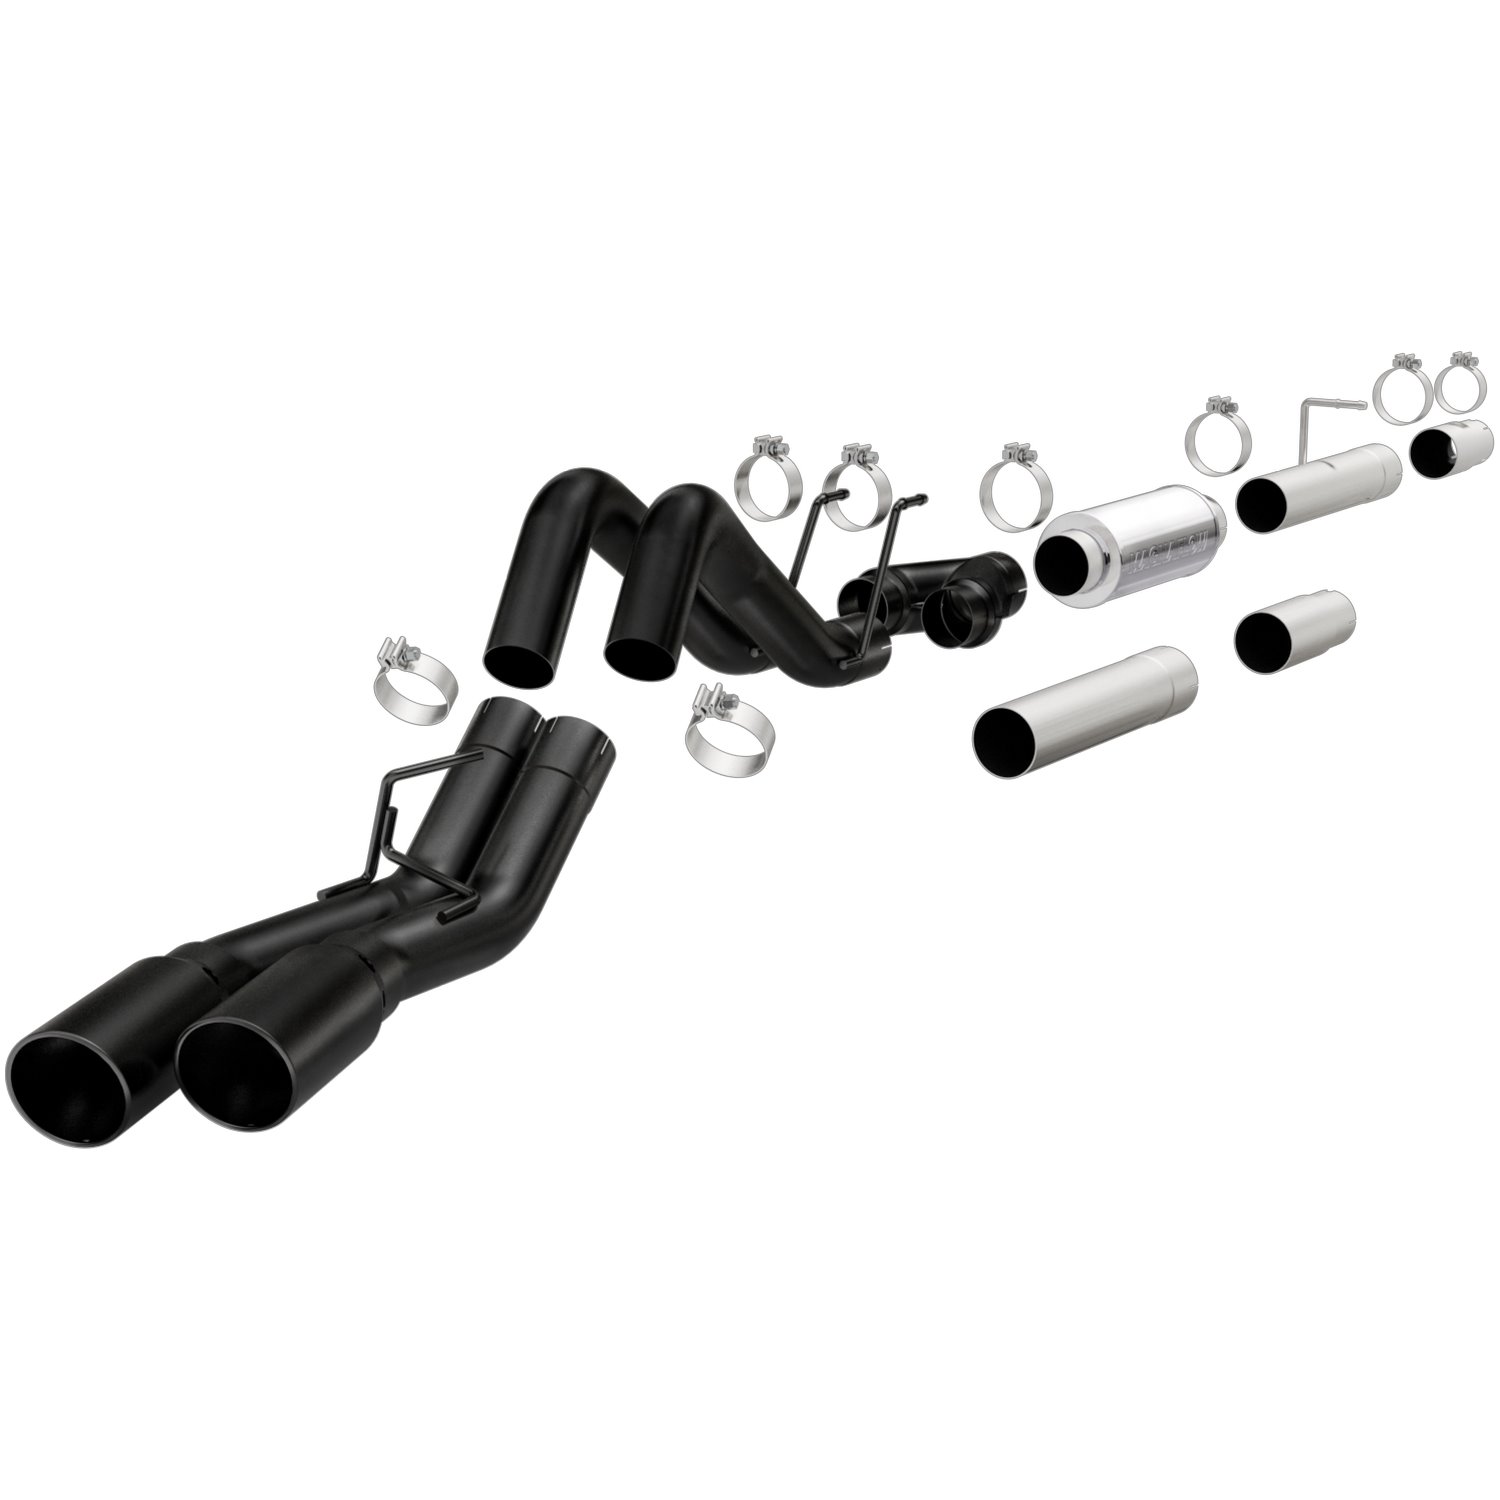 Black Series Filter-Back Performance Exhaust System 2008-2010 Ford F-250/F-350 Super Duty 6.4L Diesel